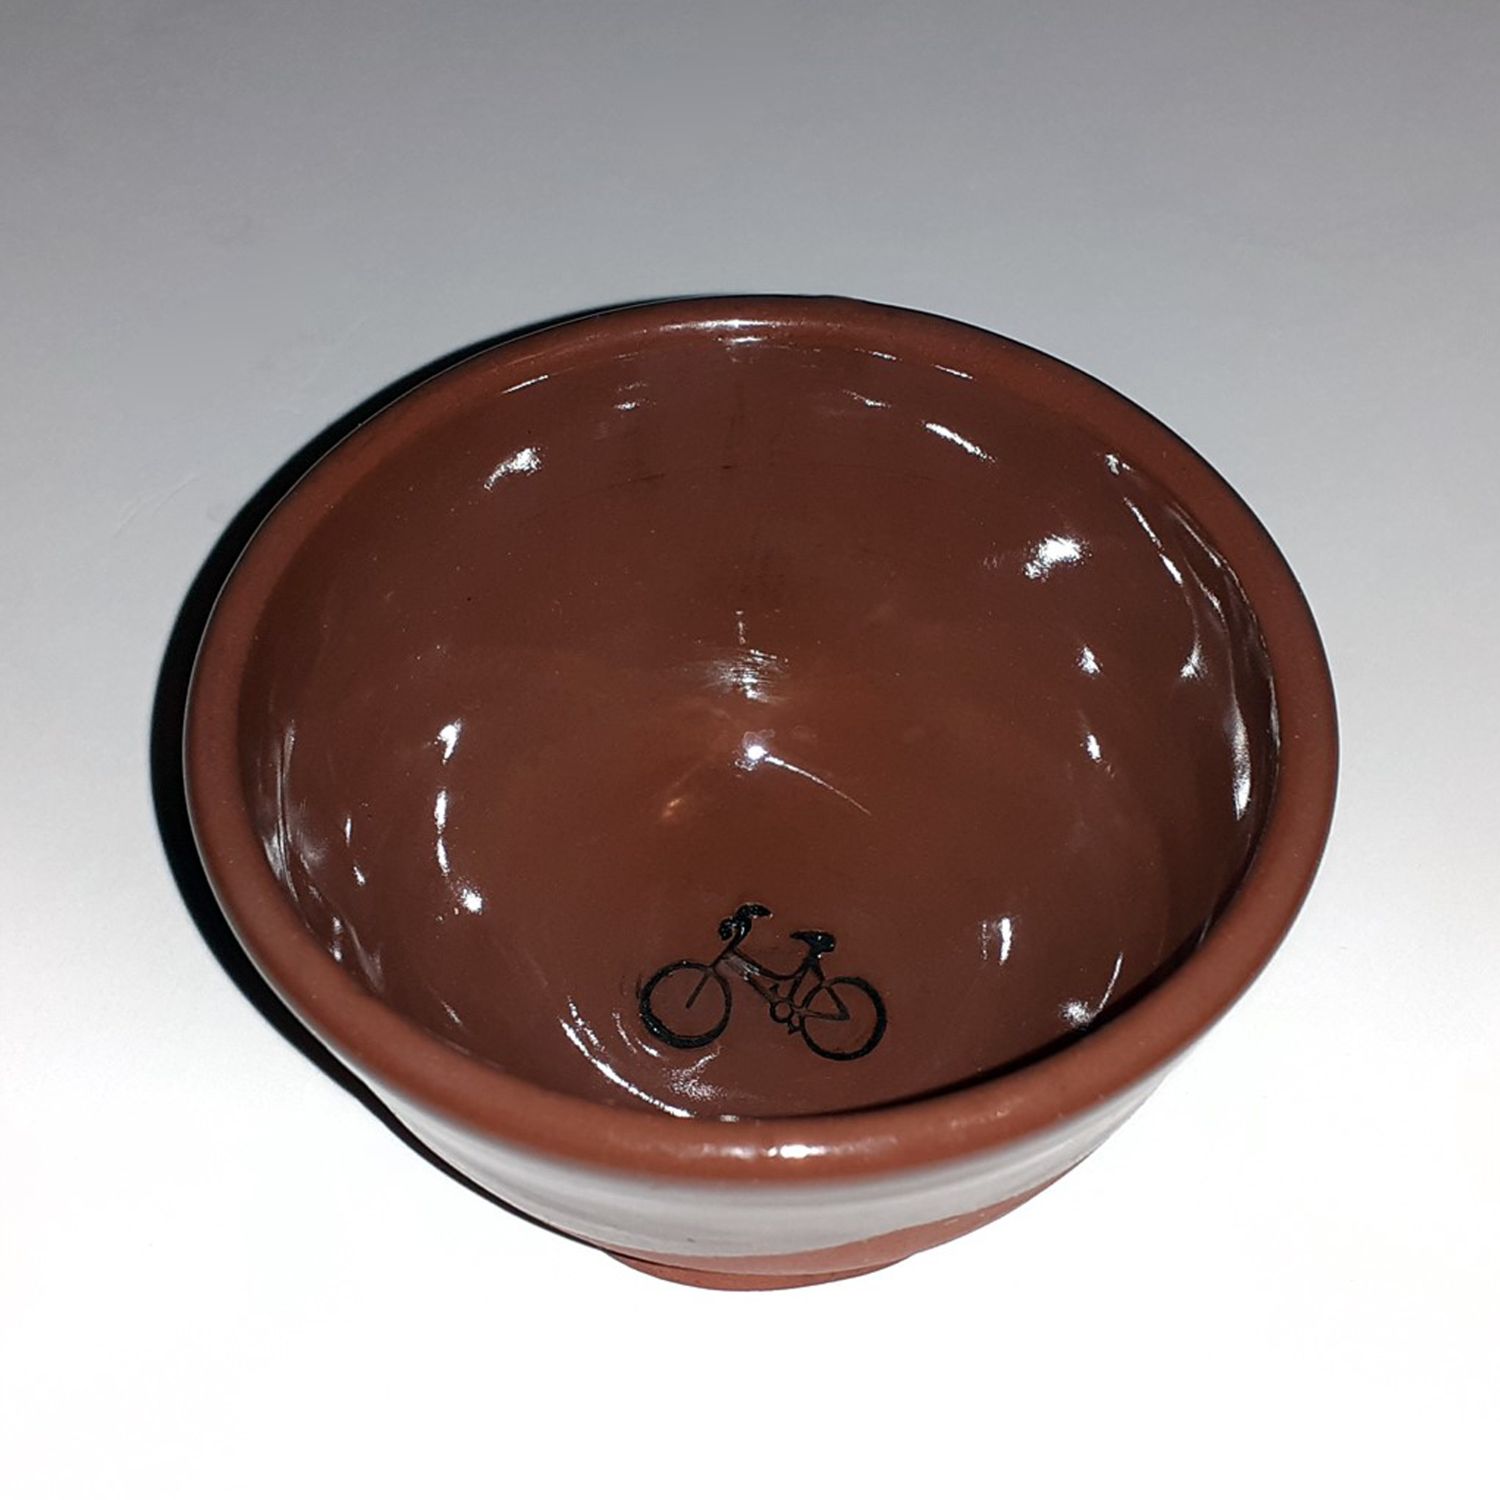 Mary McKenzie: Bicycle 2oz Dip Bowl – Terracotta and Brown Product Image 1 of 1